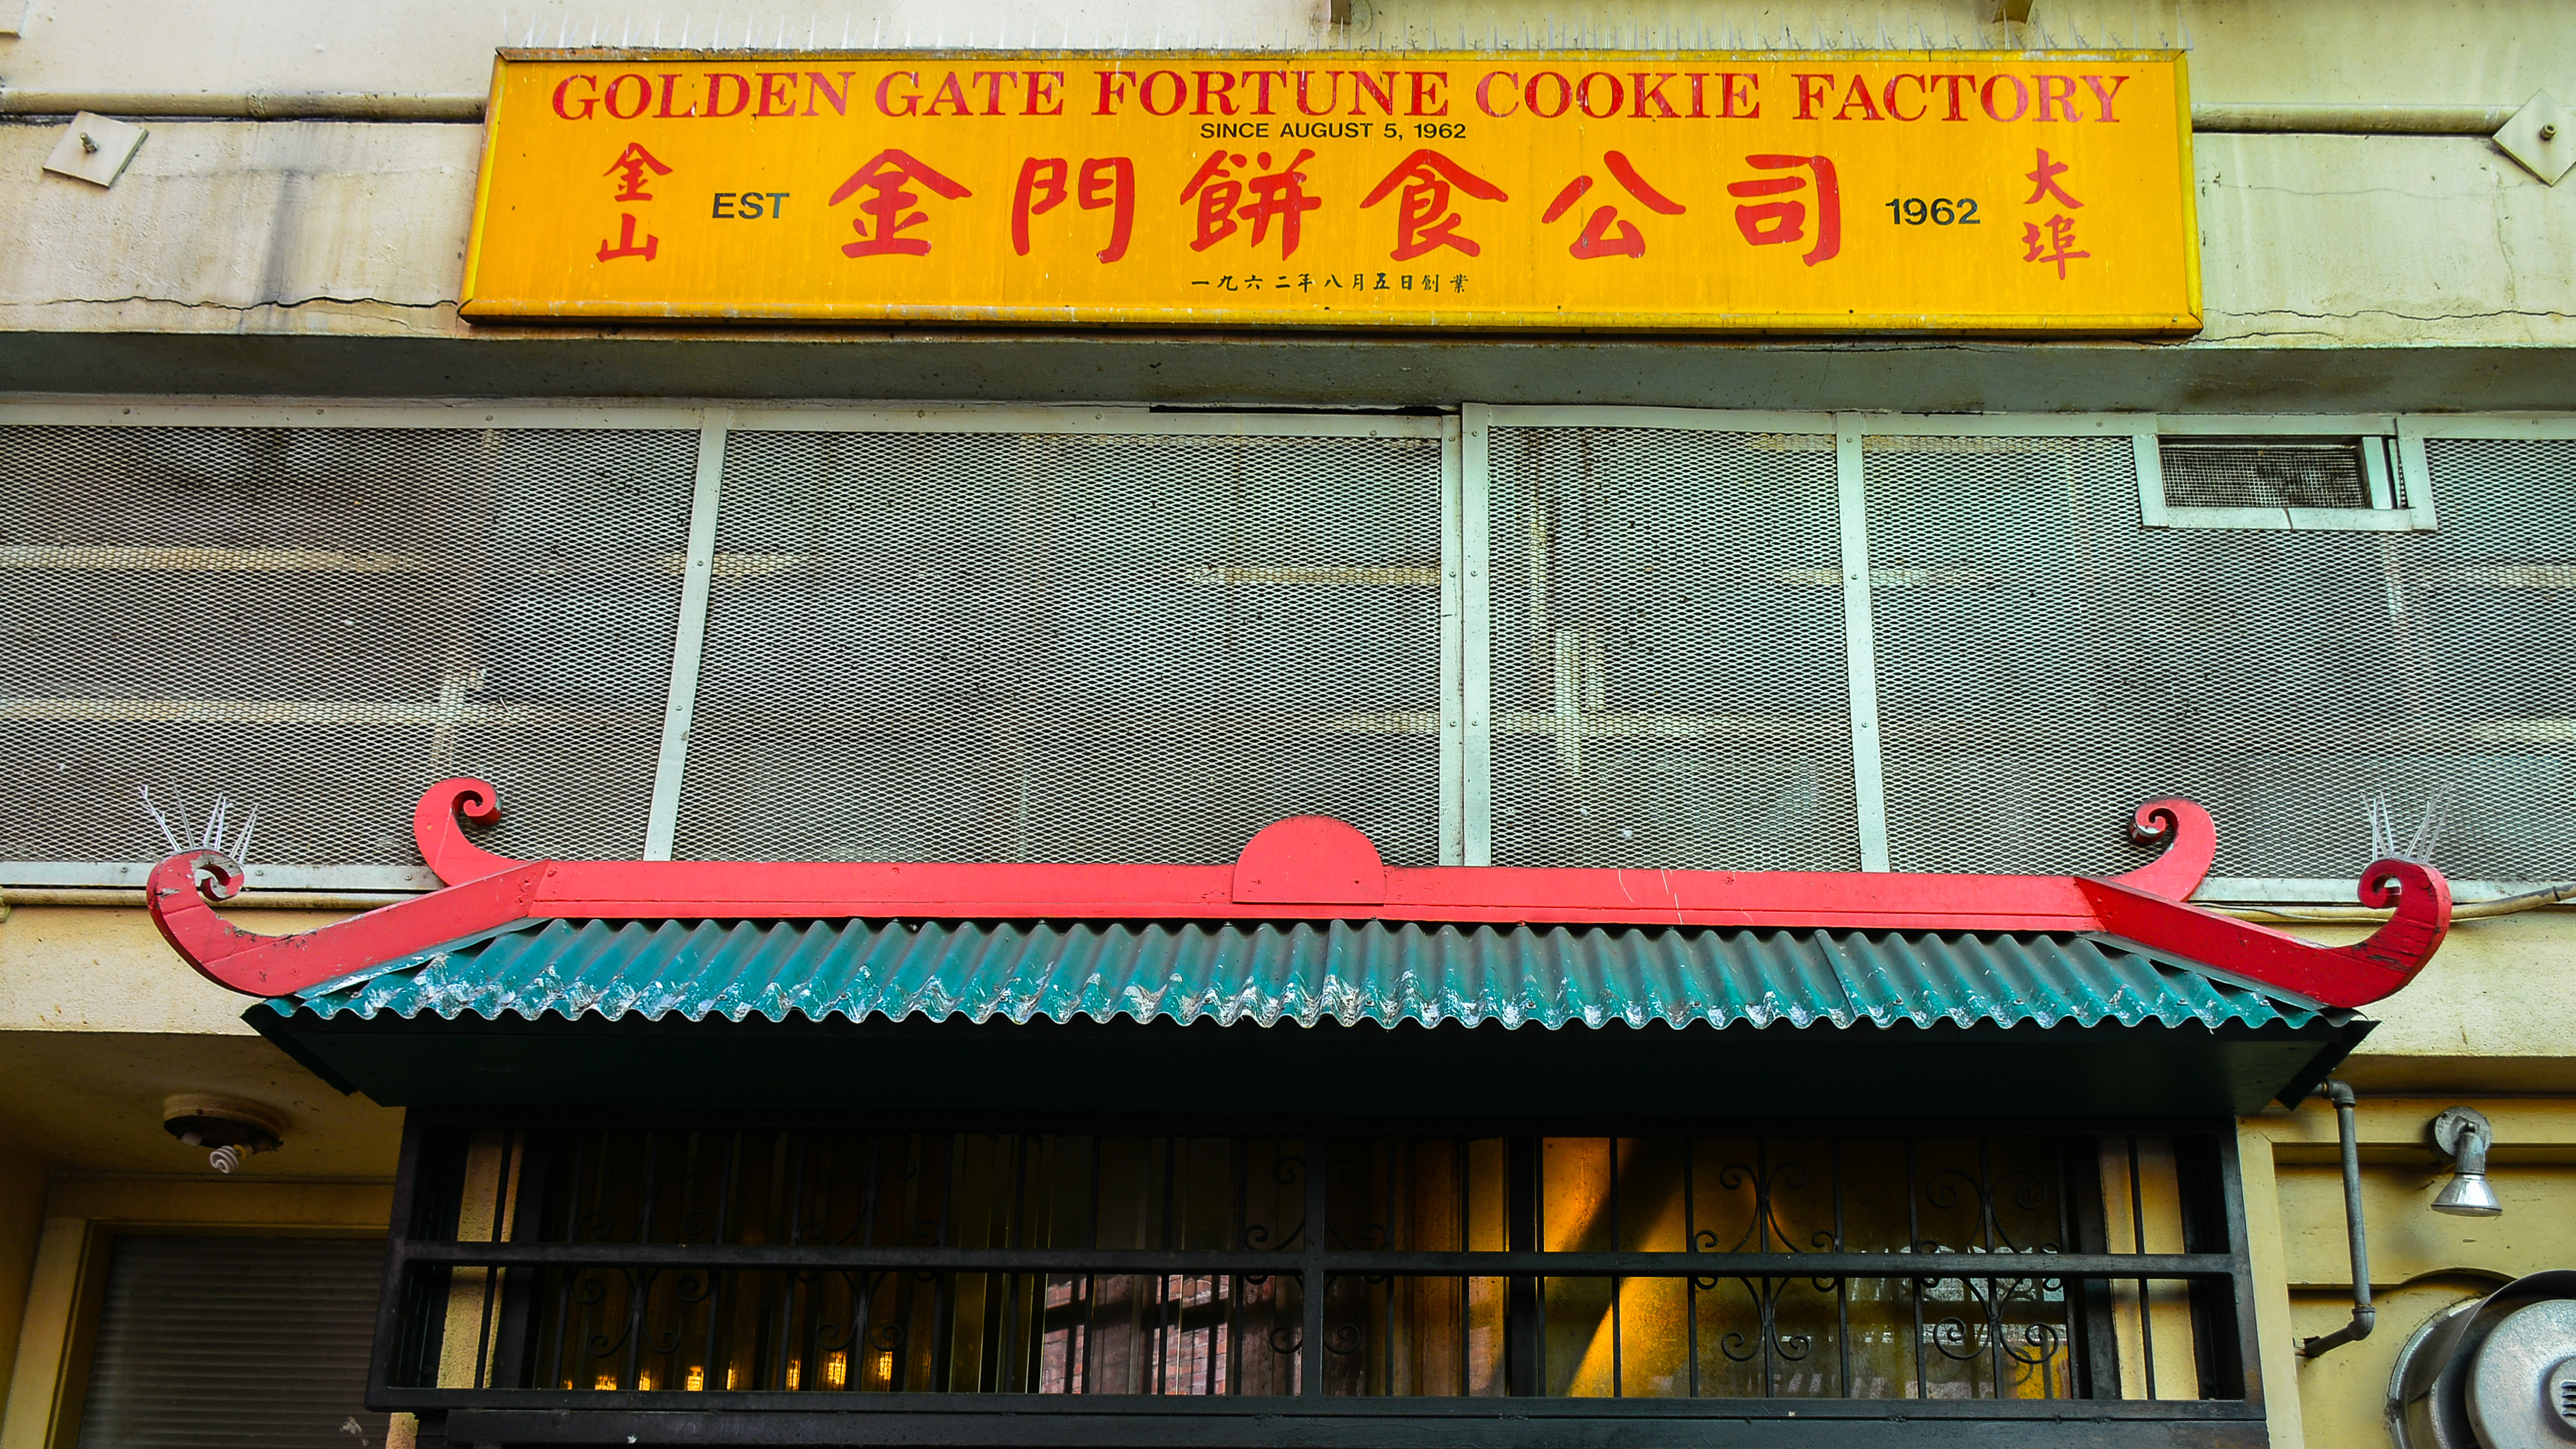 Golden Gate Fortune Cookie Factory in Chinatown. 